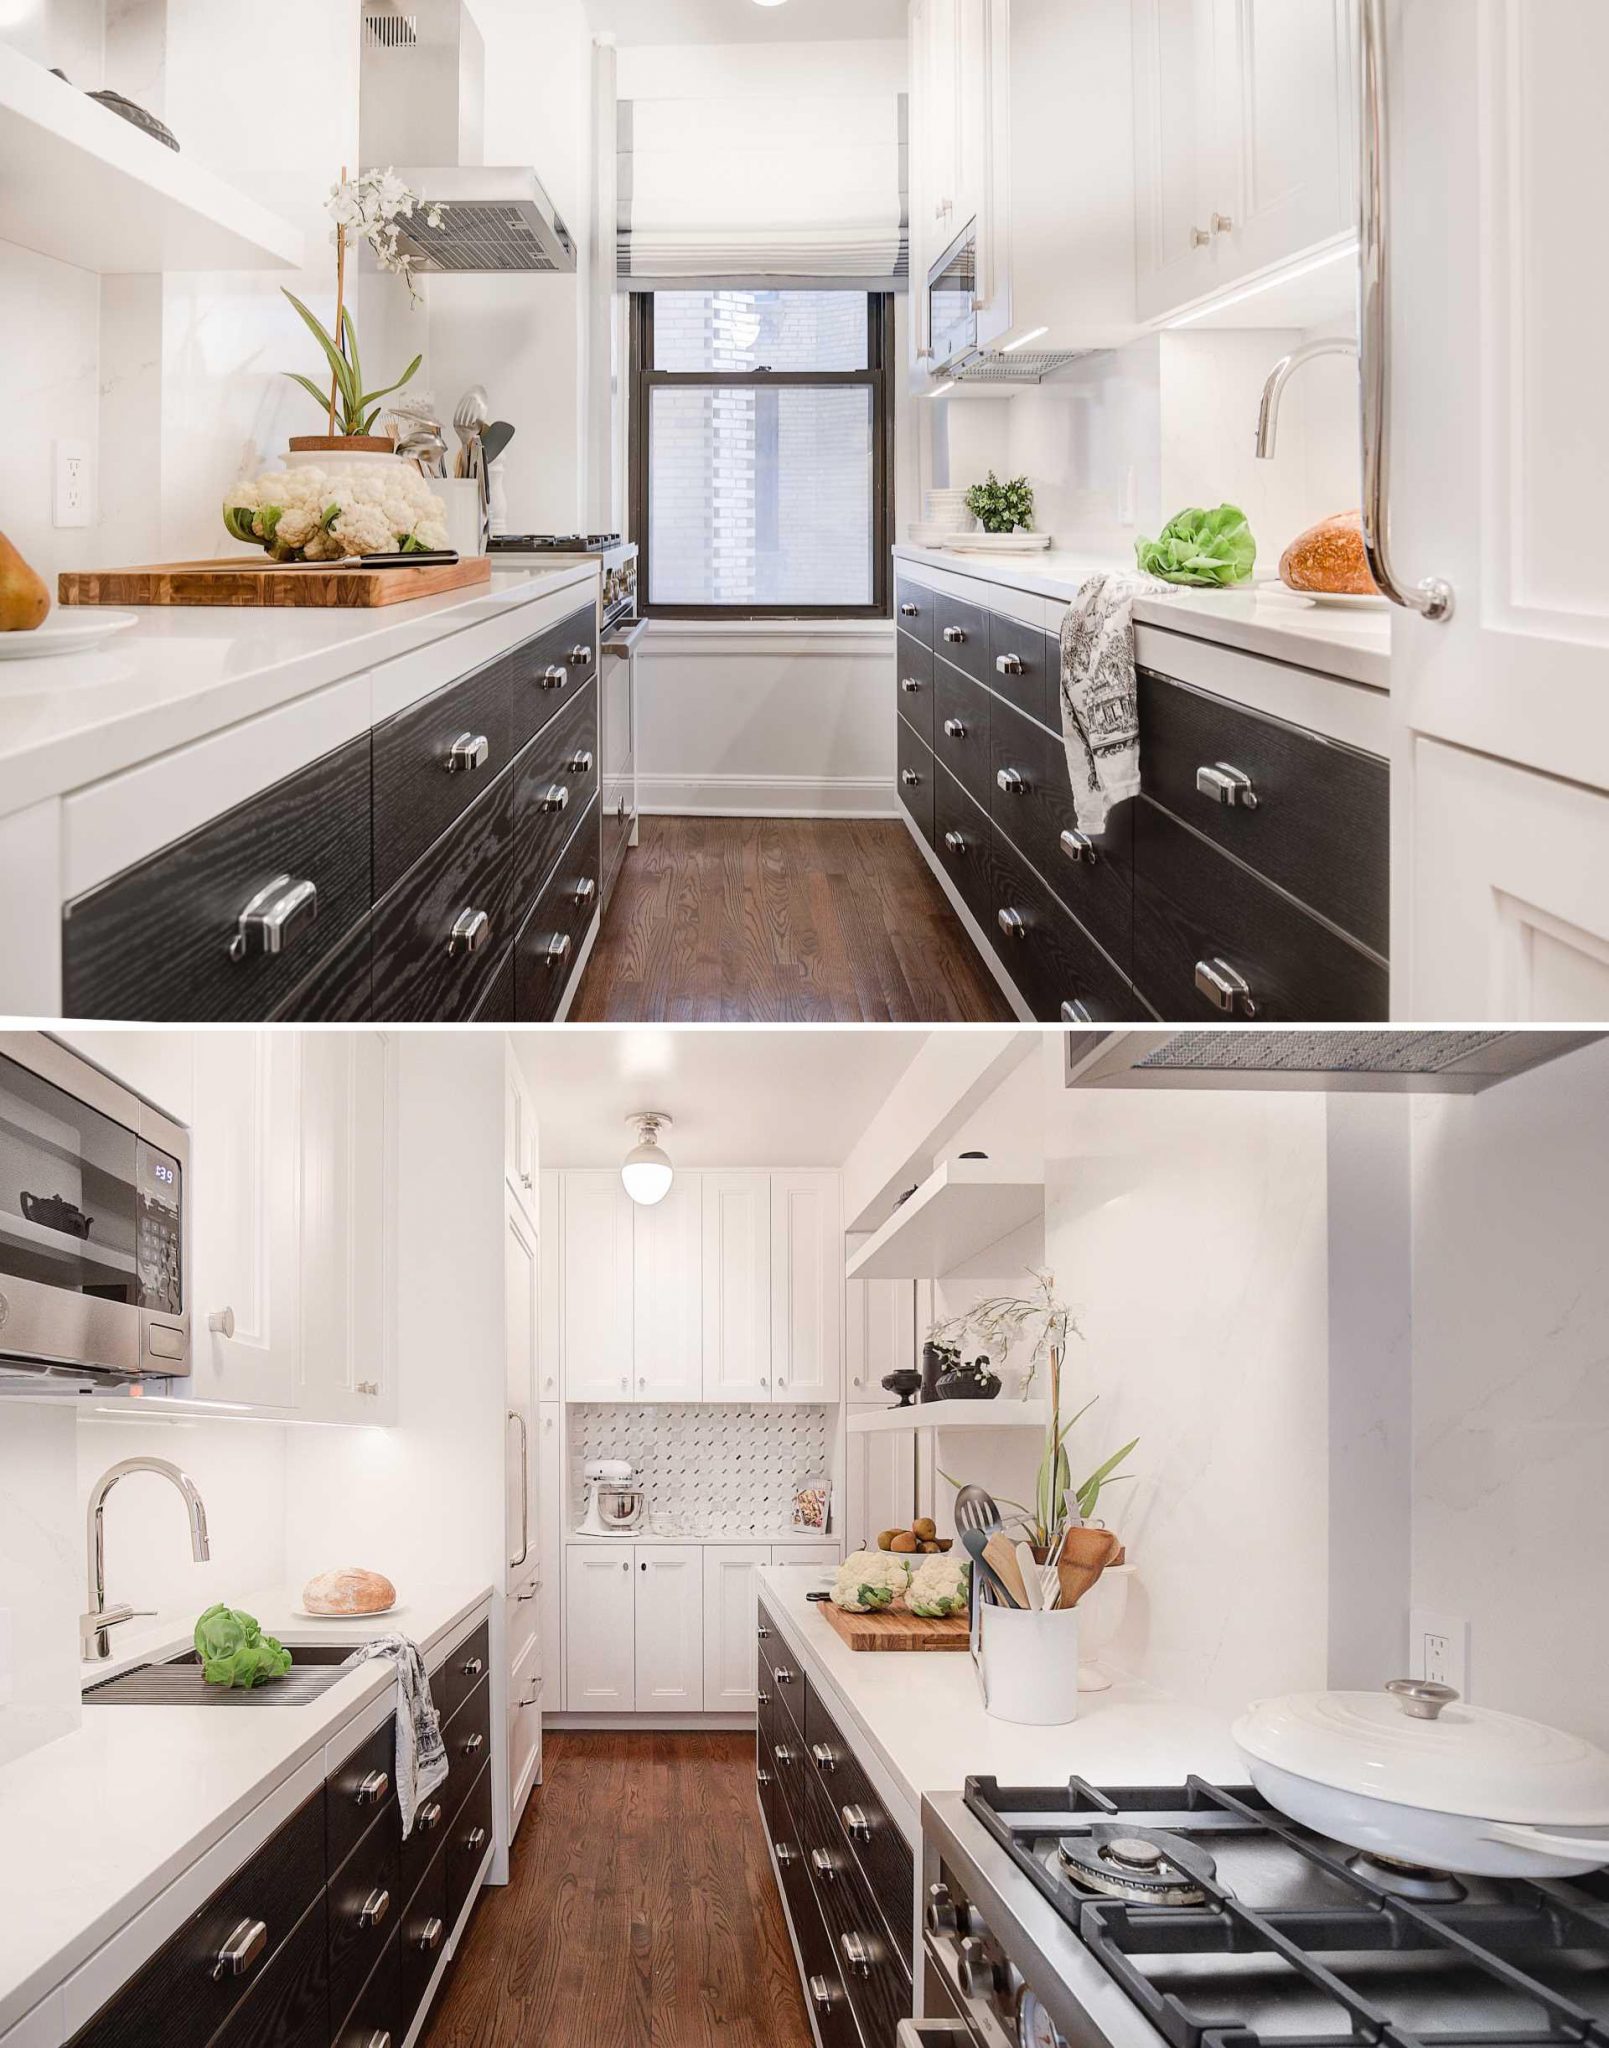 Before And After - The Remodel Of A Small And Dated Galley Kitchen